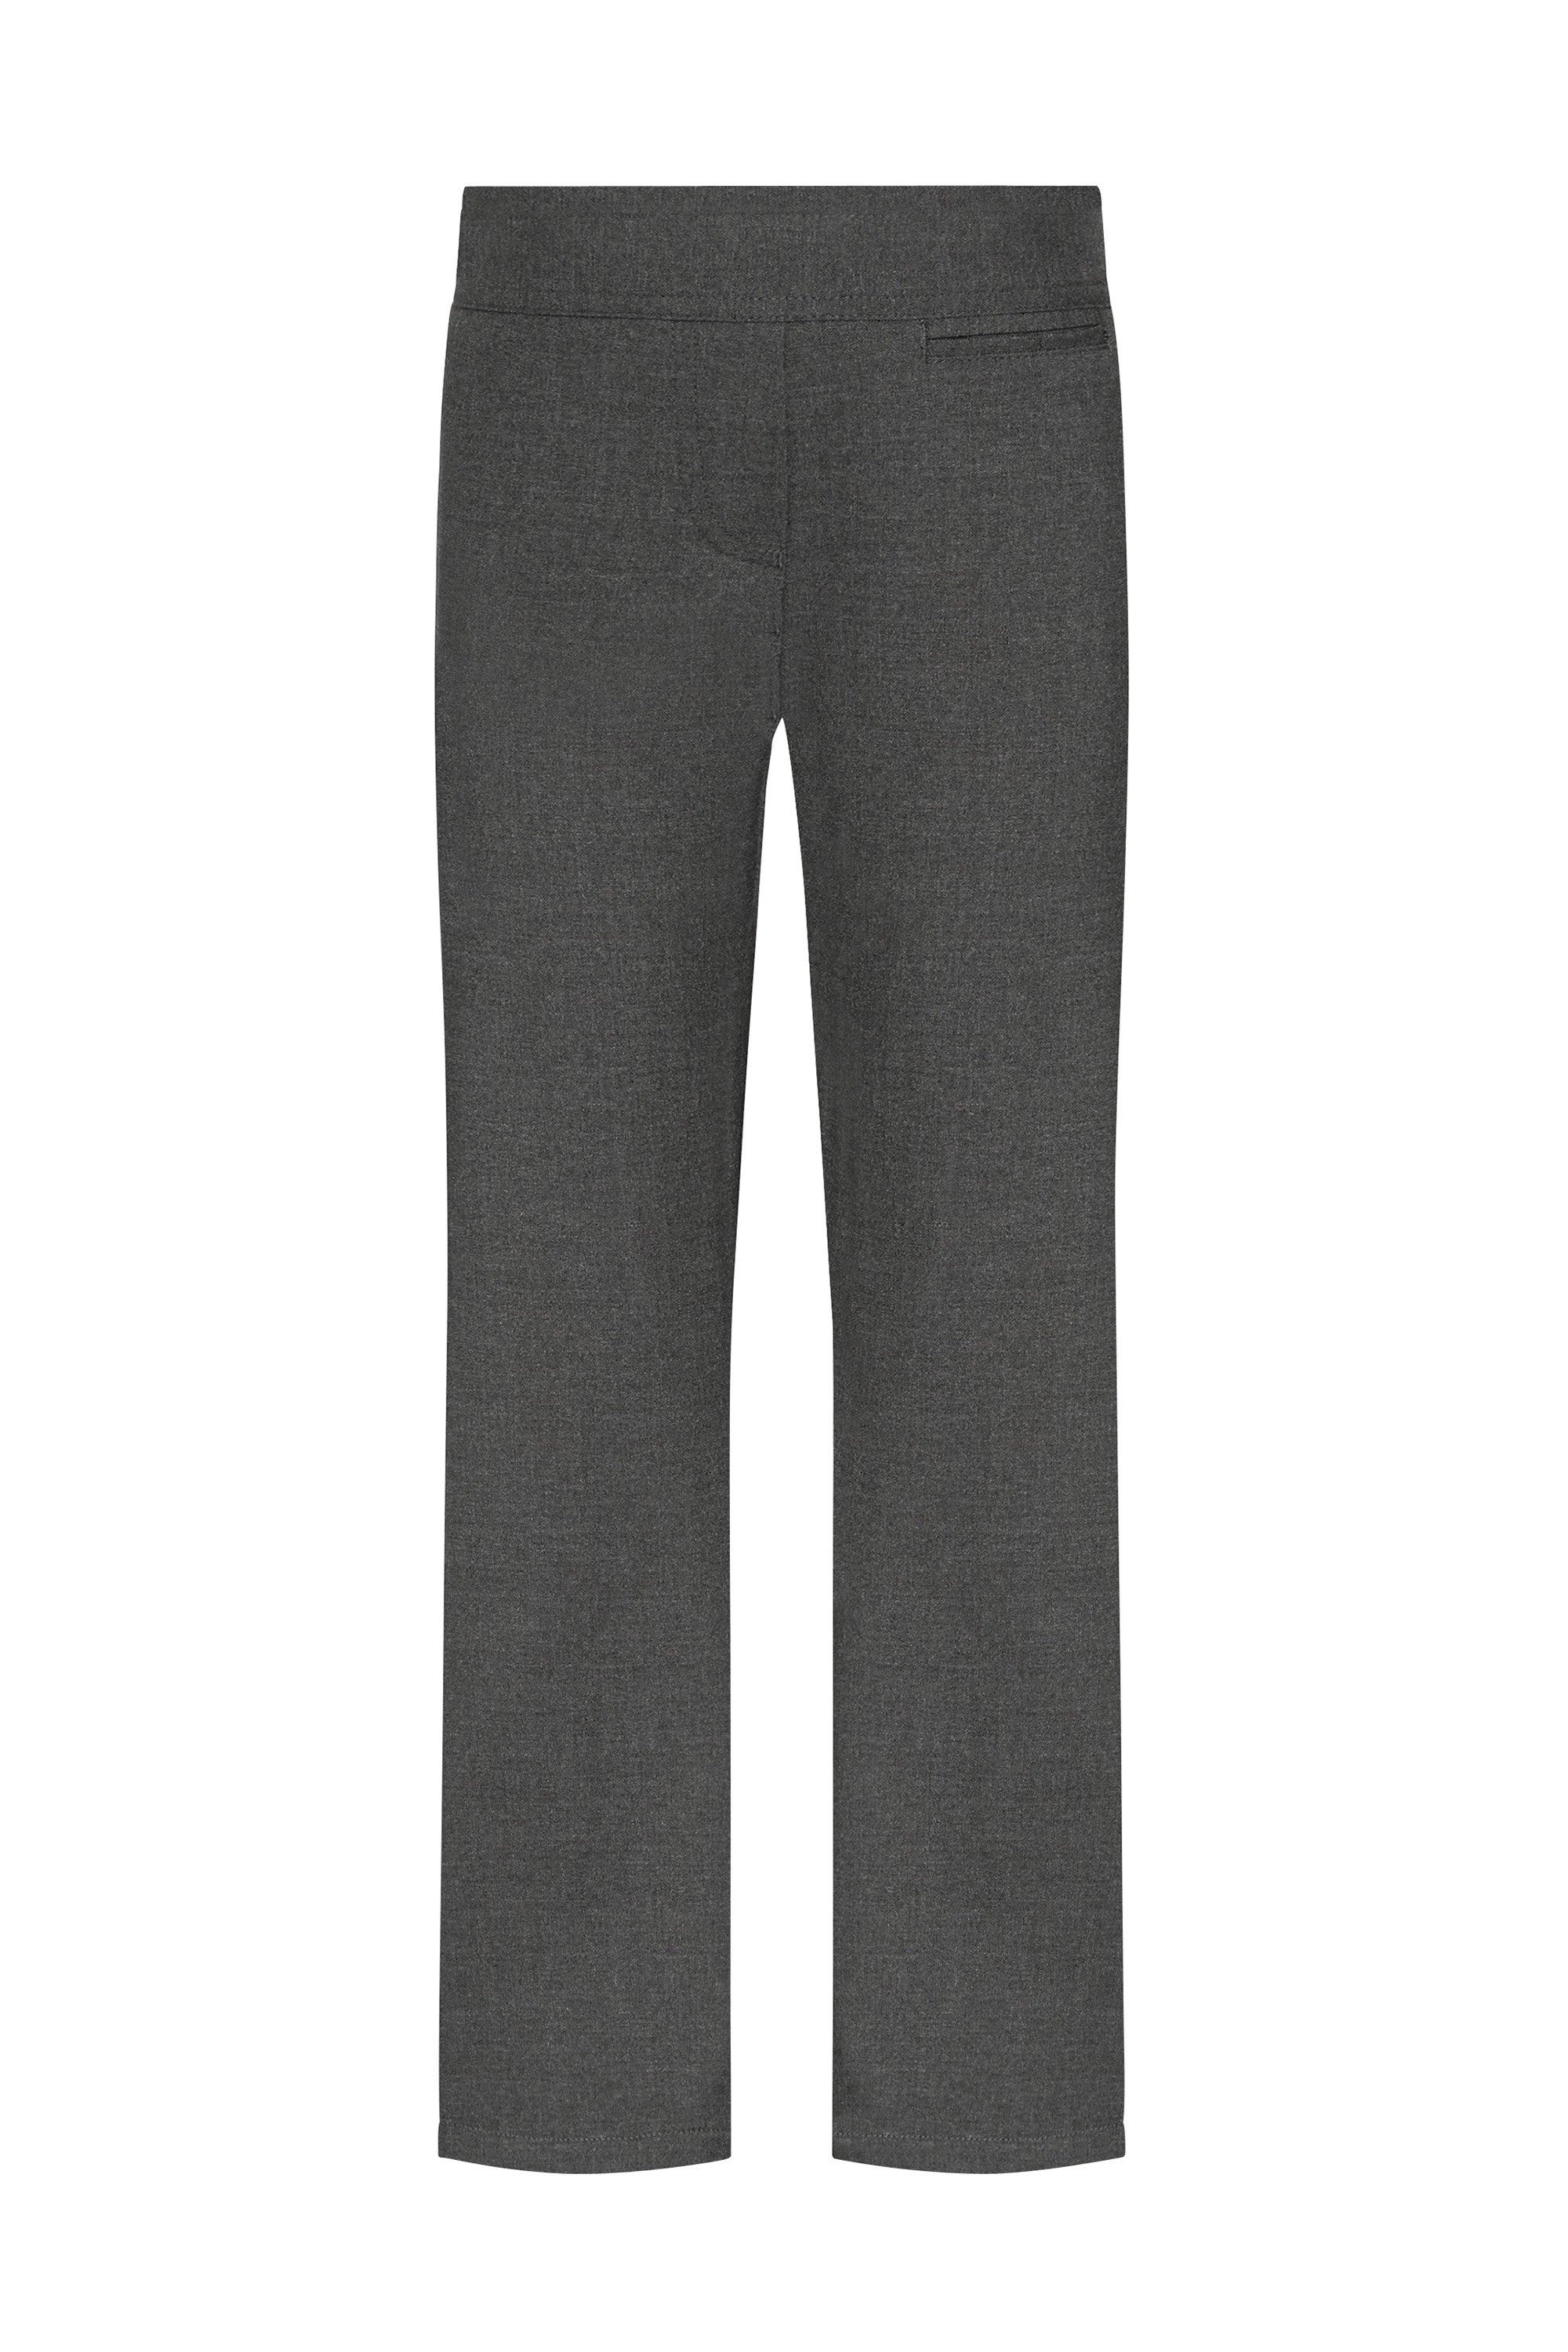 Girls School Skinny Trousers | Next Official Site